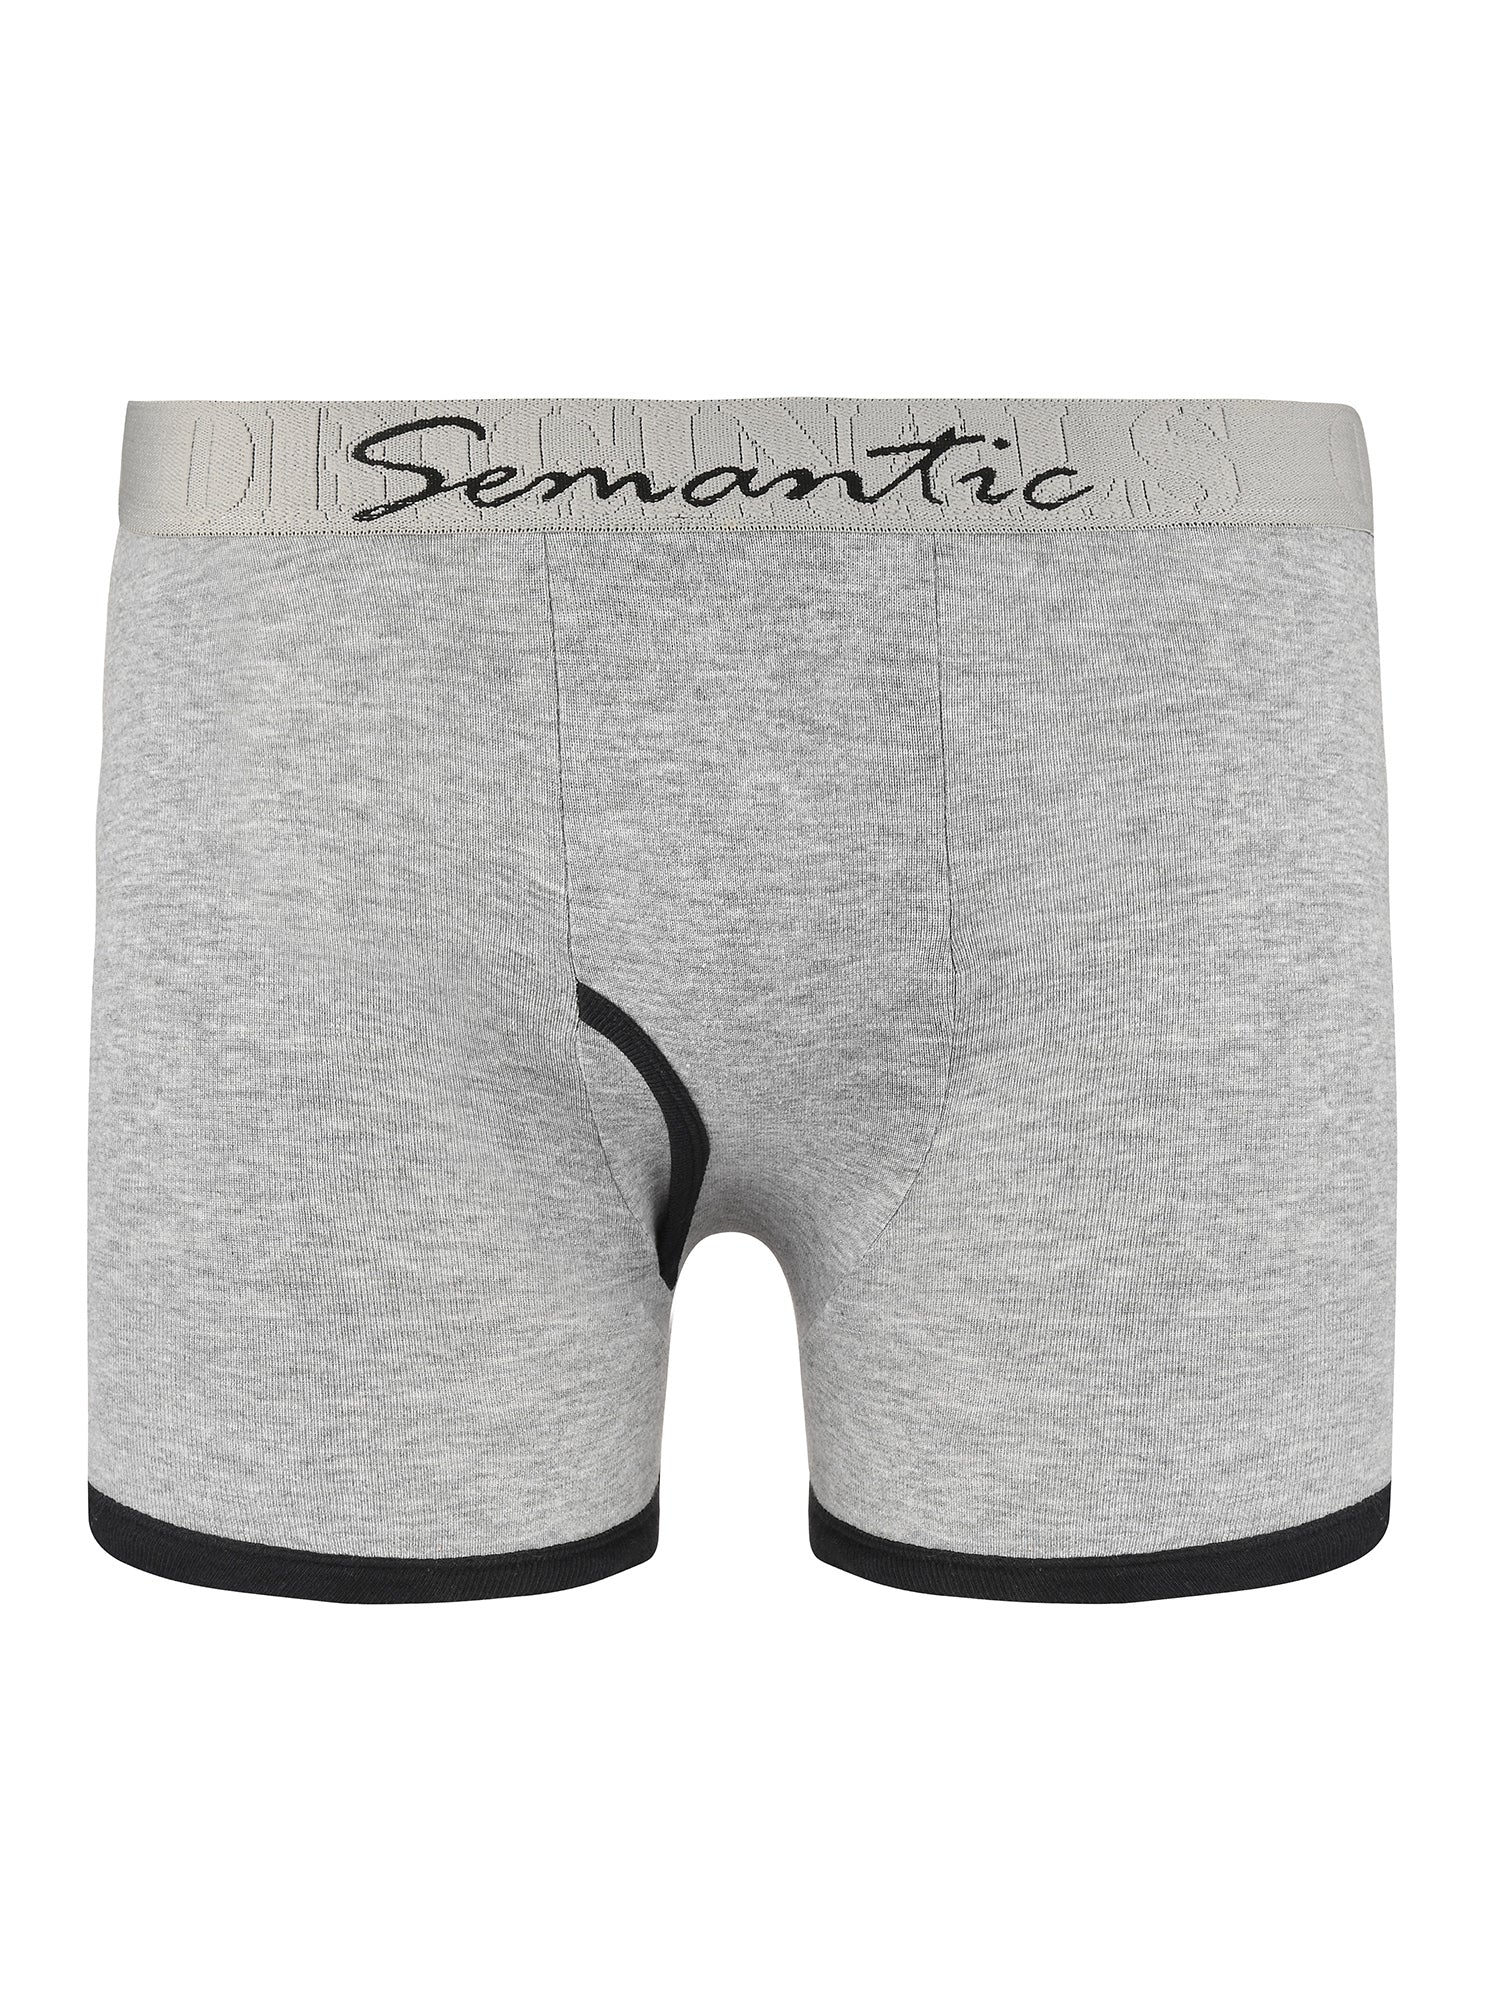 Semantic Cotton Designer Long Trunks (Boxer Briefs) with Fly - Solid